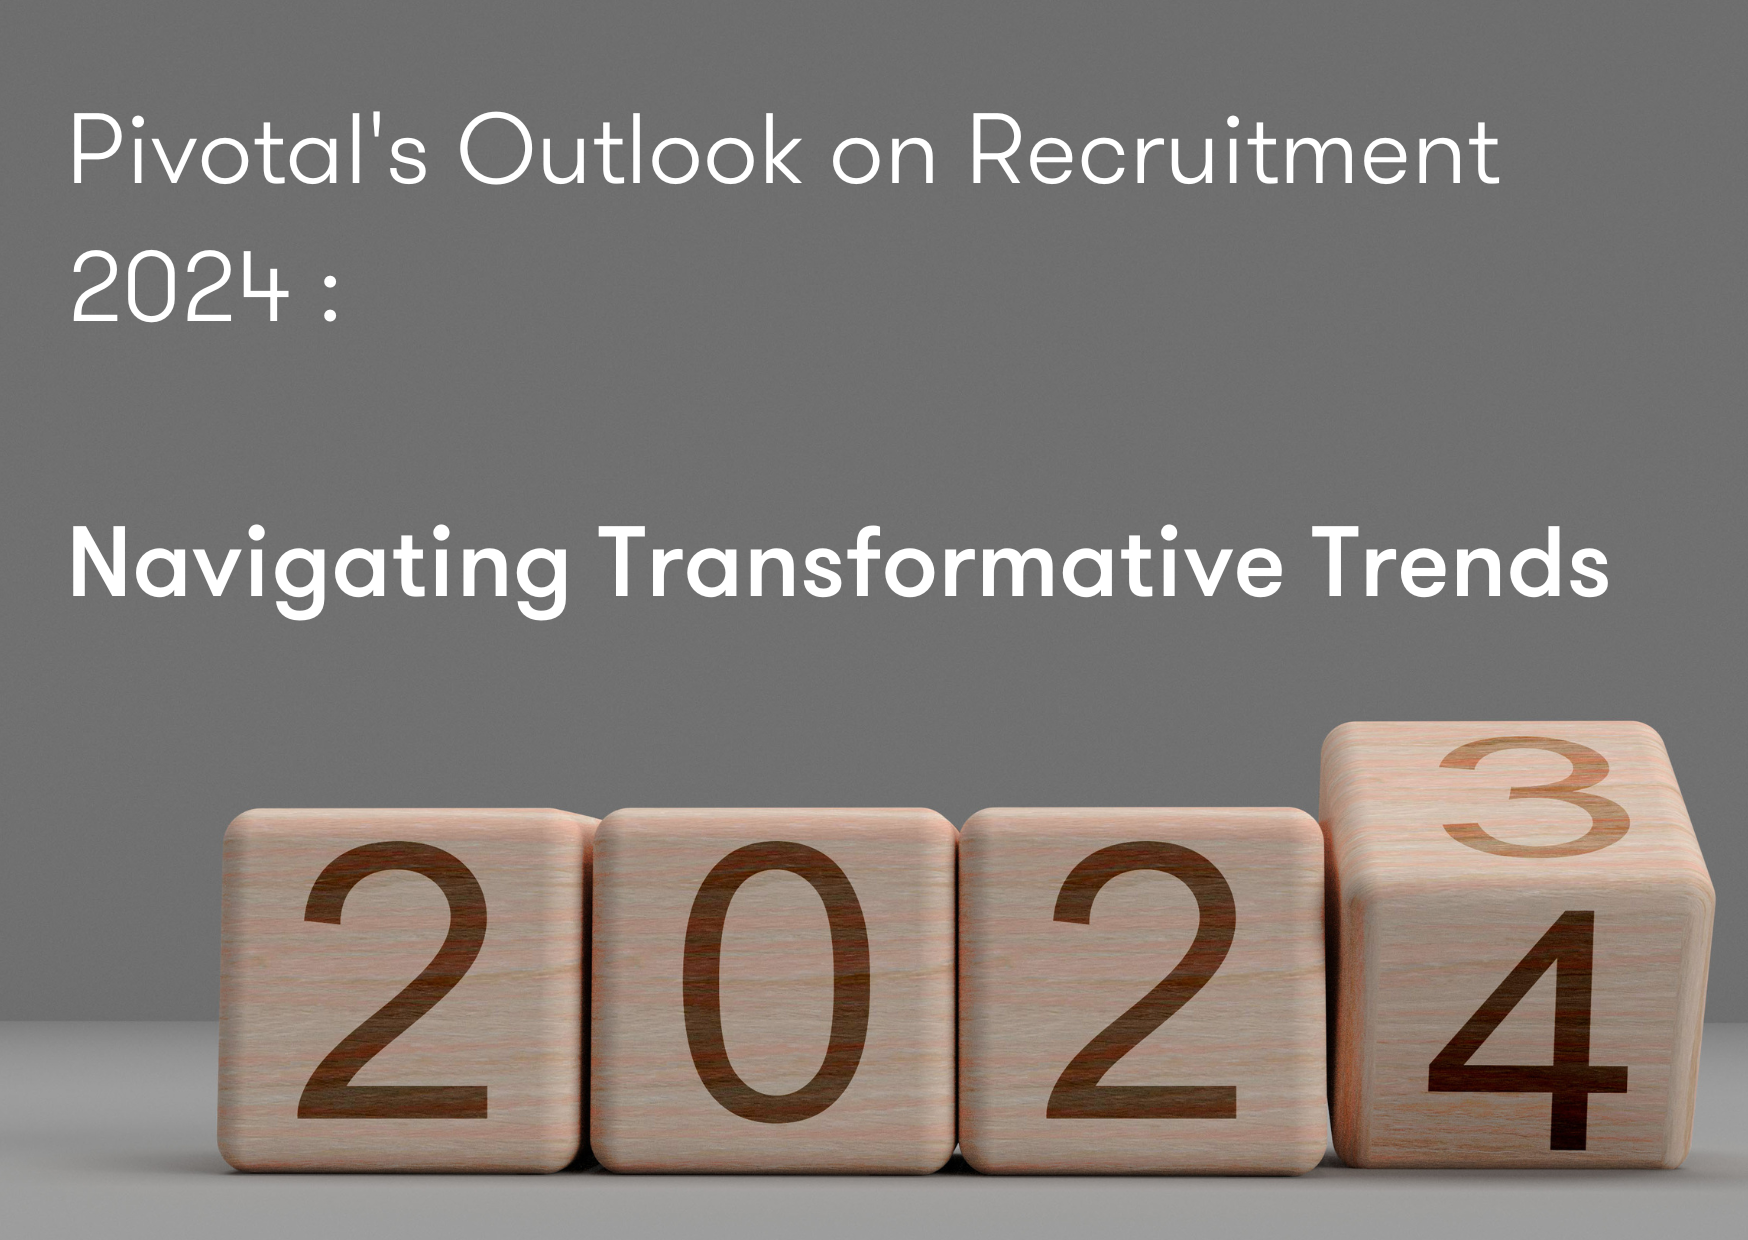 Pivotal's Outlook on Recruitment 2024: Navigating Transformative Trends